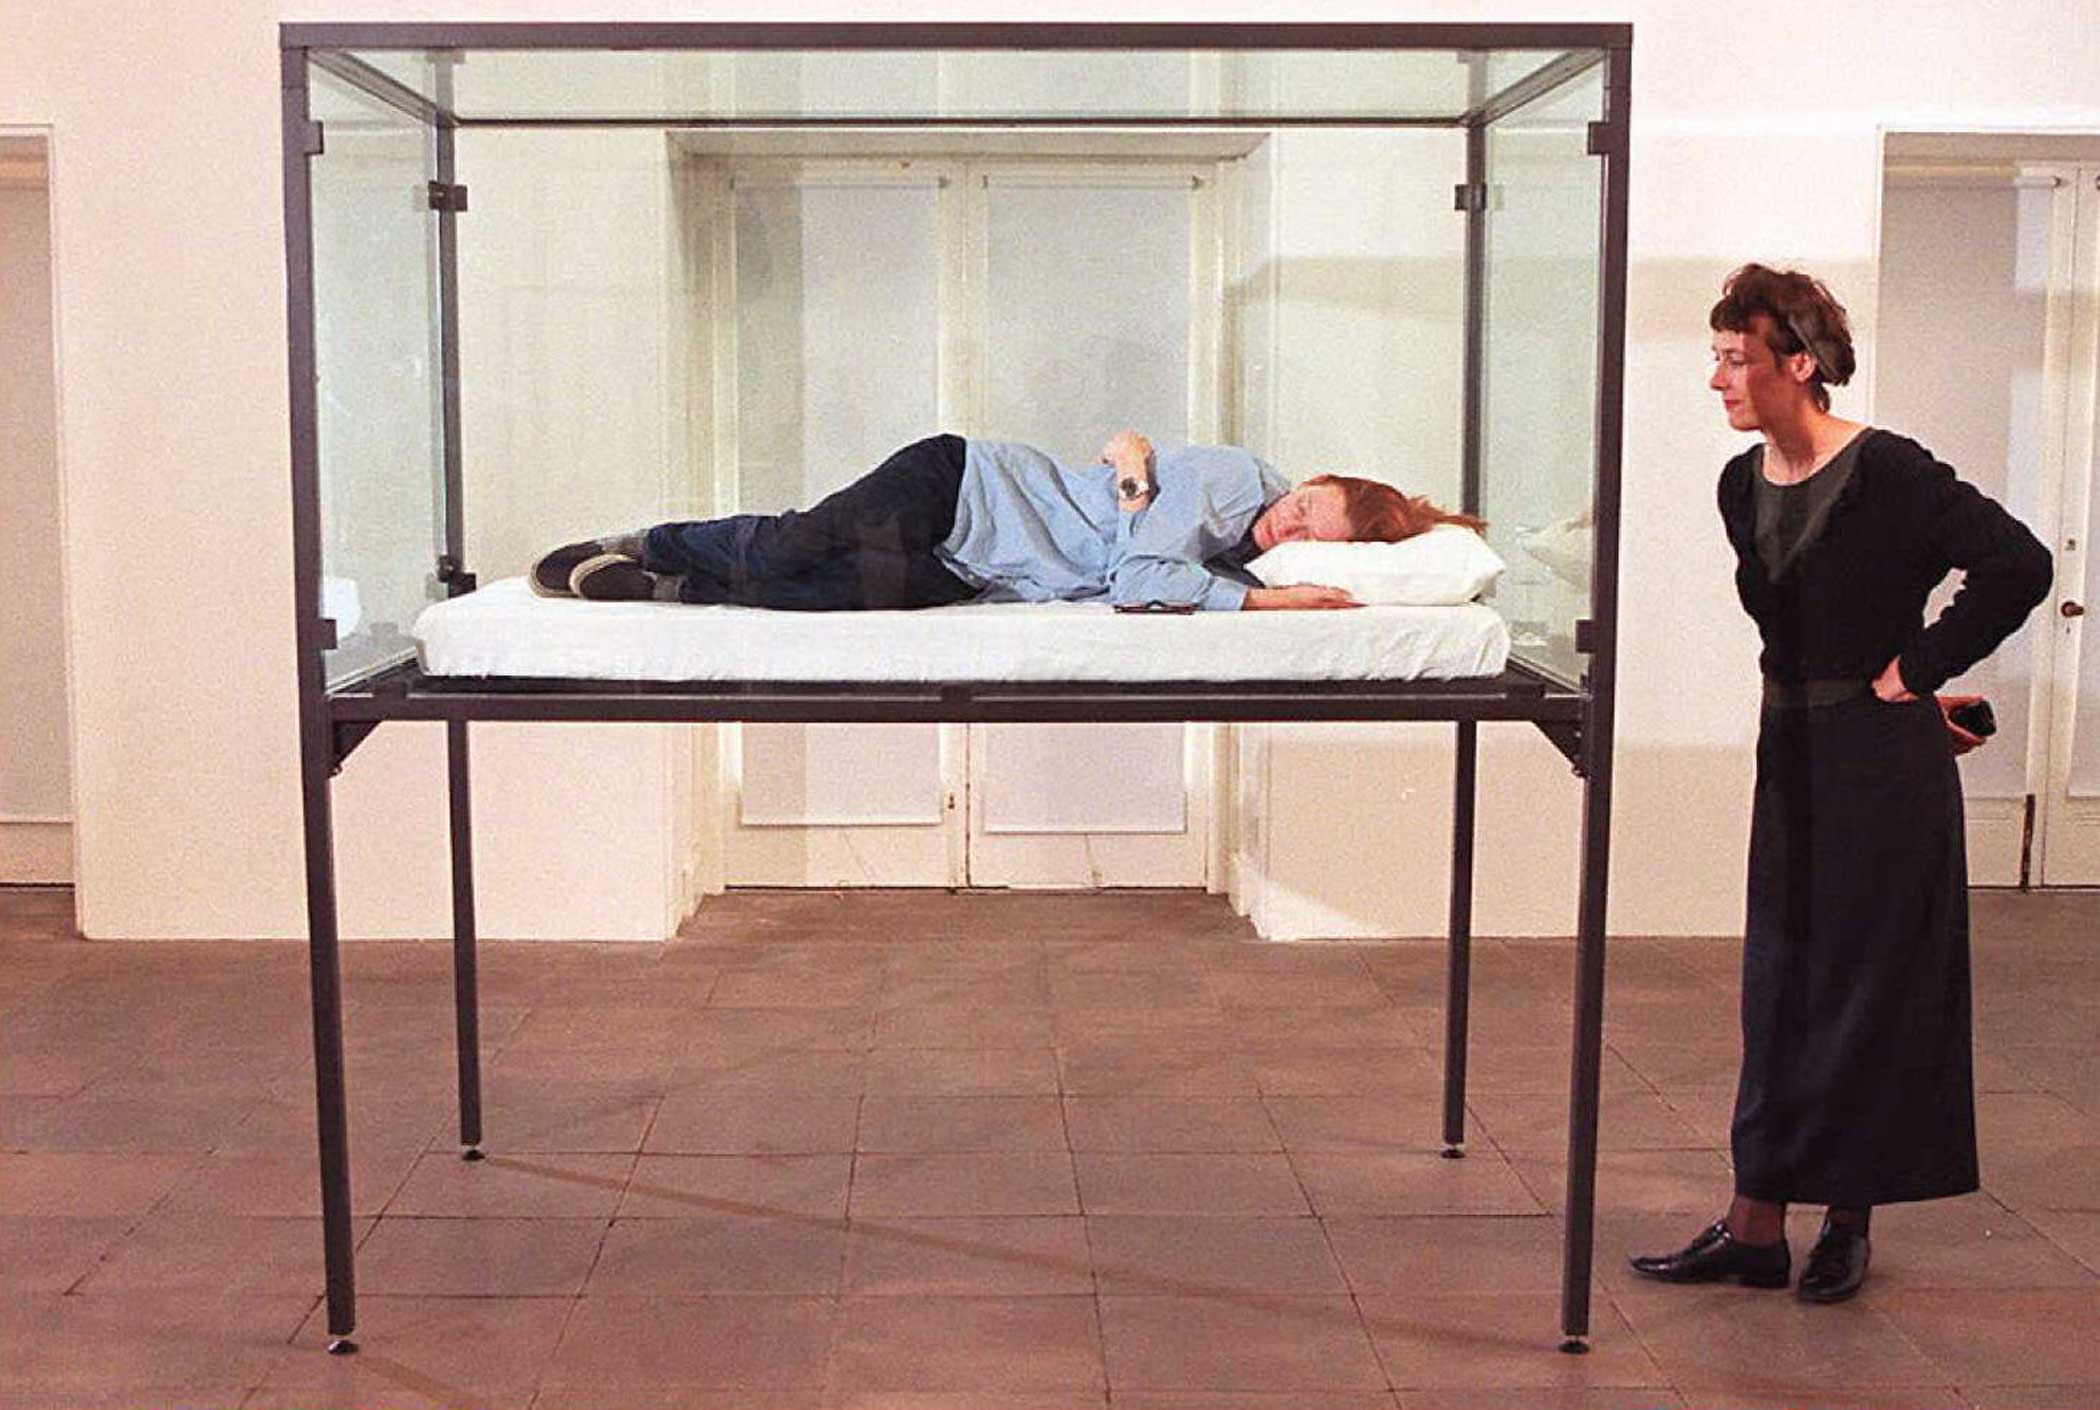 Tilda Swinton is pictured sleeping in a glass box as part of an exhibition called "The Maybe" at the Serpentine Gallery on Sept. 4, 1995 in London.